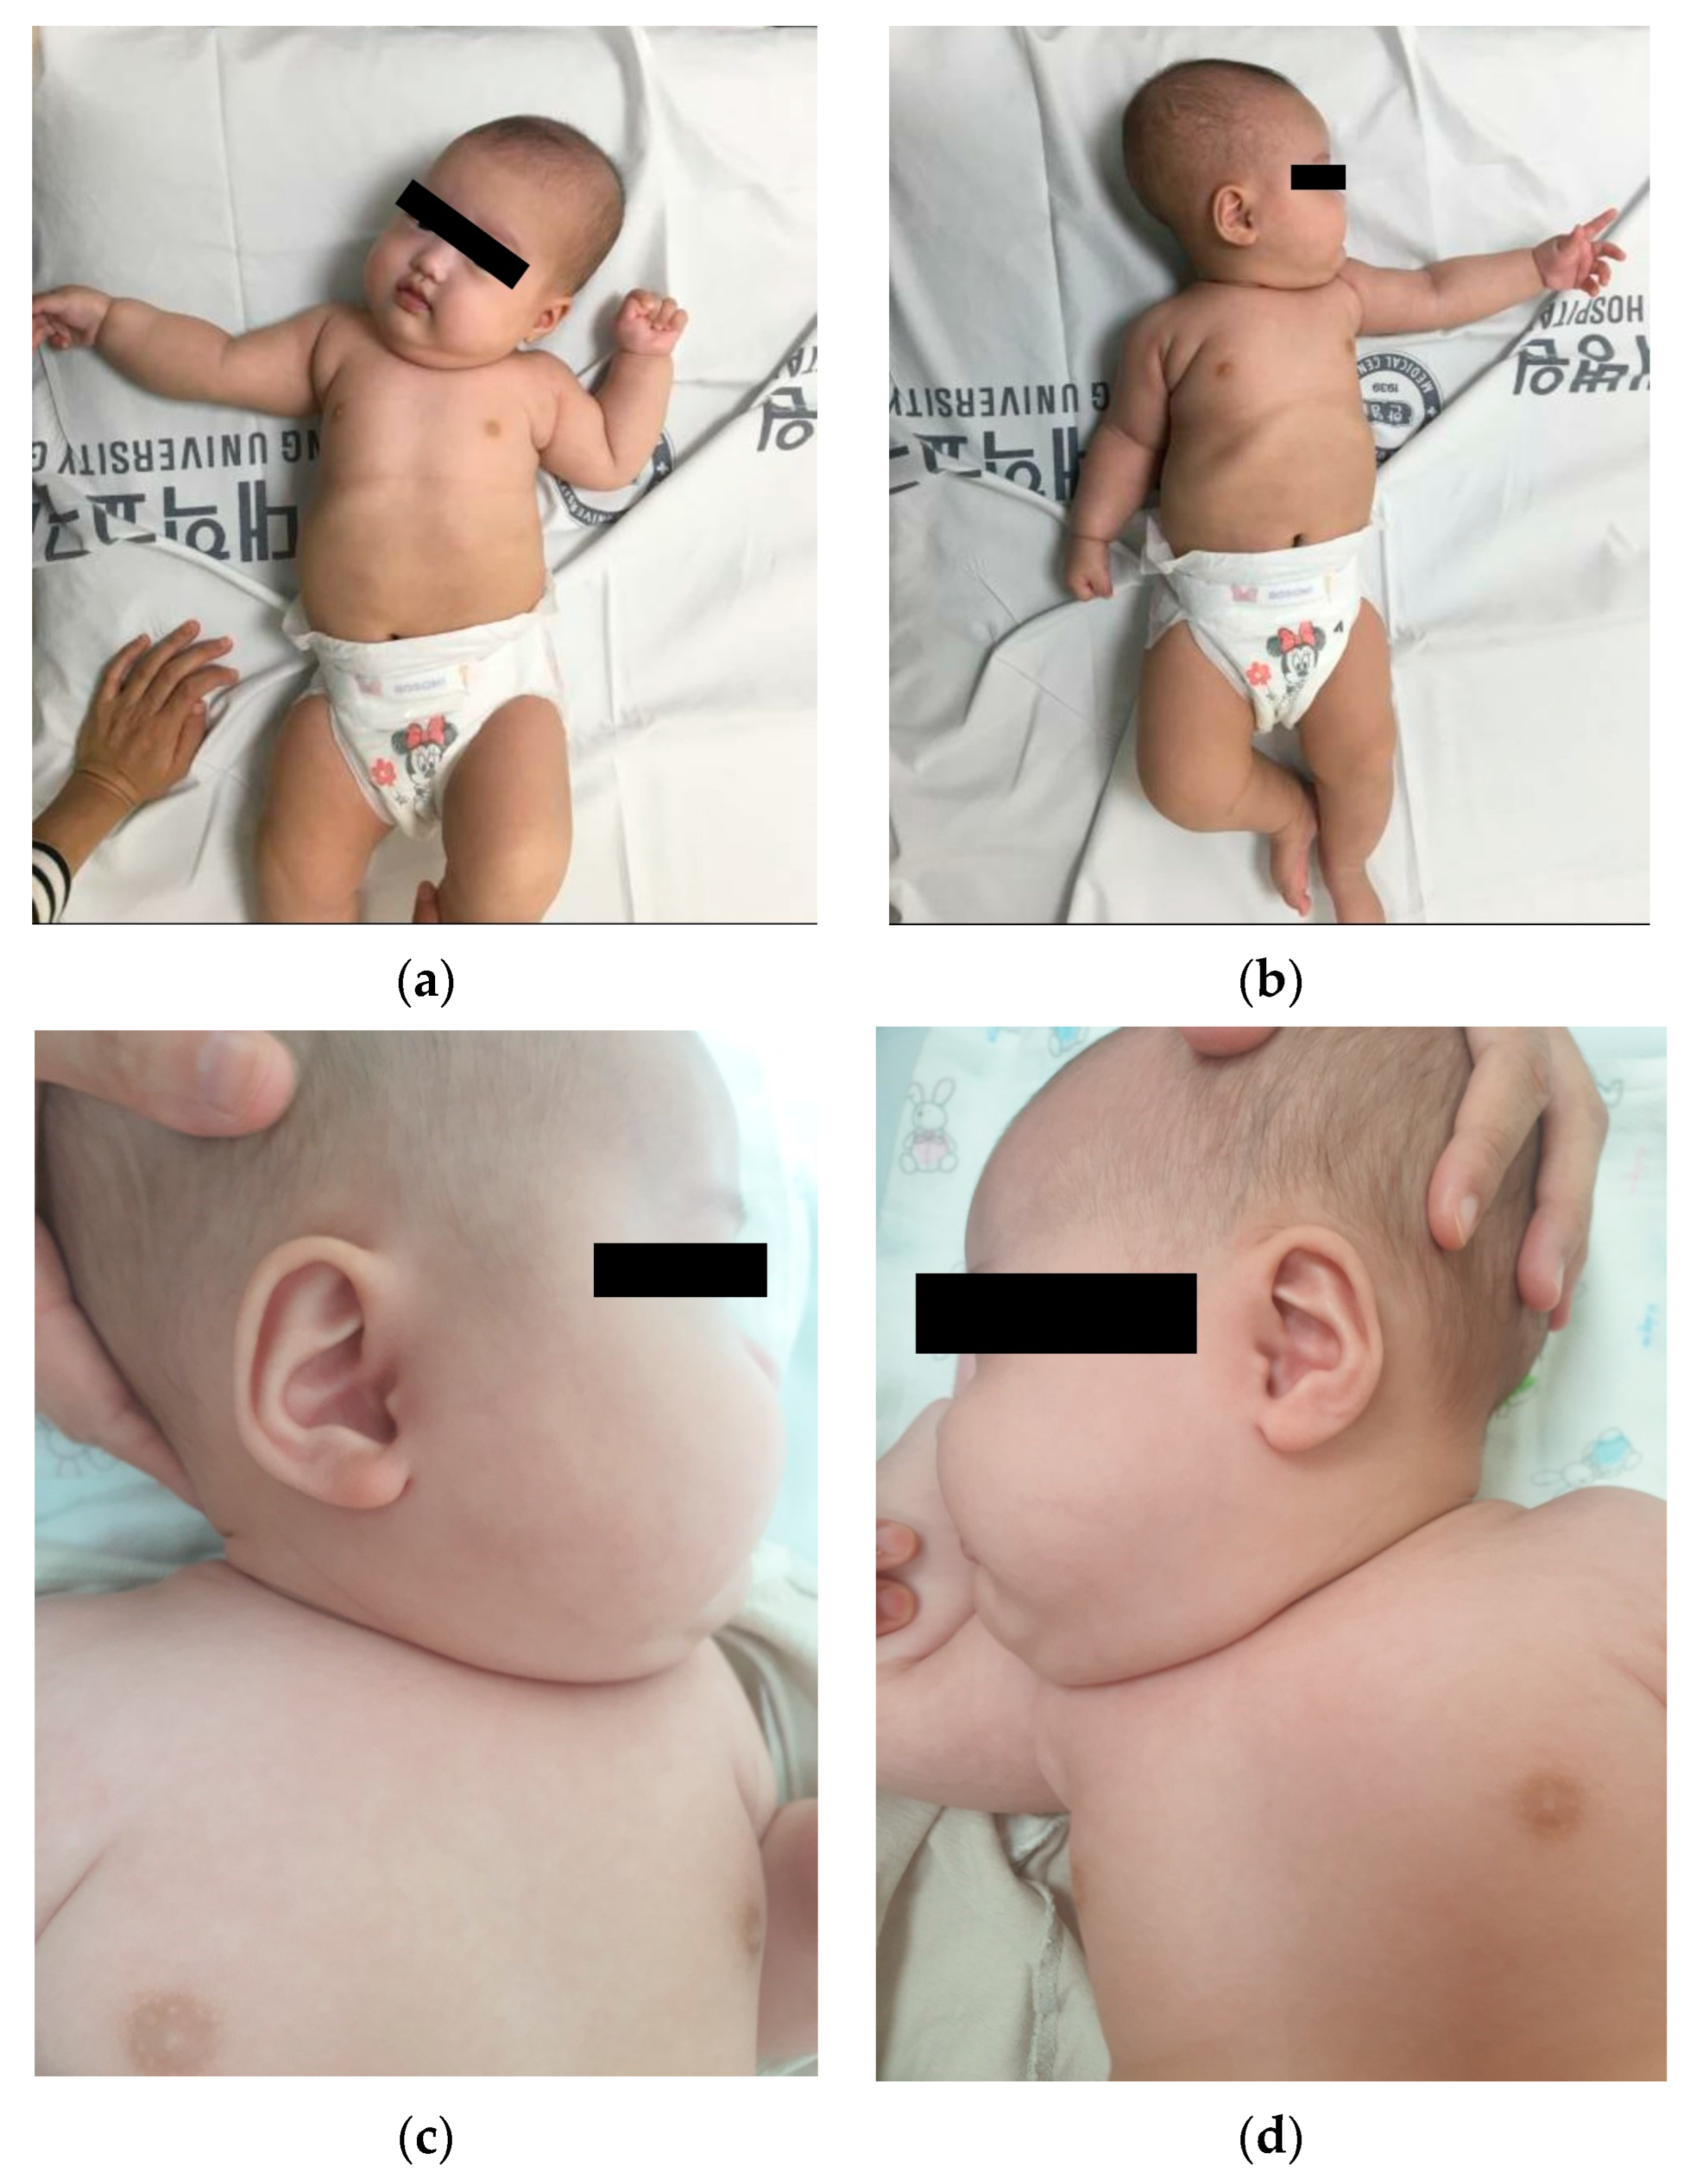 Children | Free Full-Text | Congenital Hemihyperplasia in an Infant with  Ipsilateral Torticollis: A Case Report